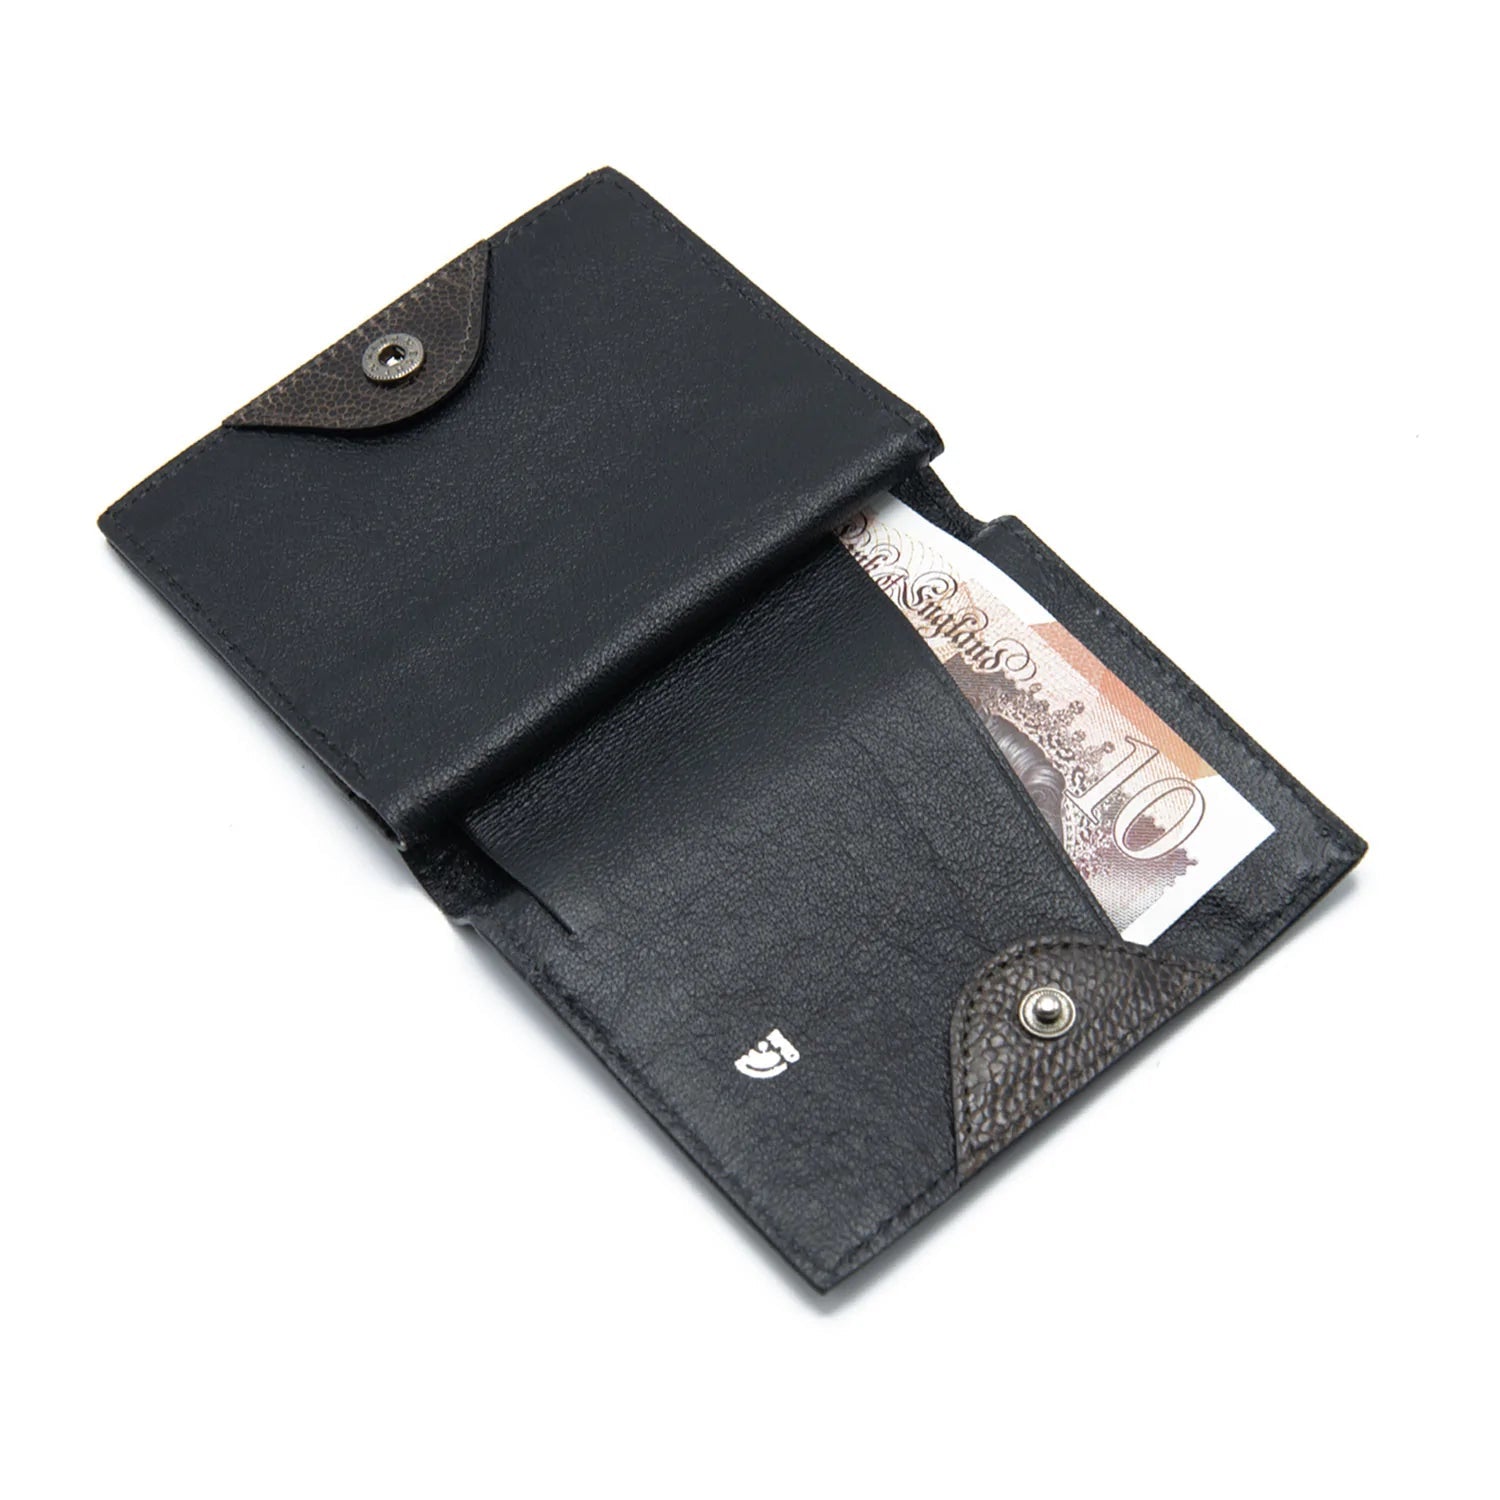 How to care for an ostrich wallet - Ostrich2Love